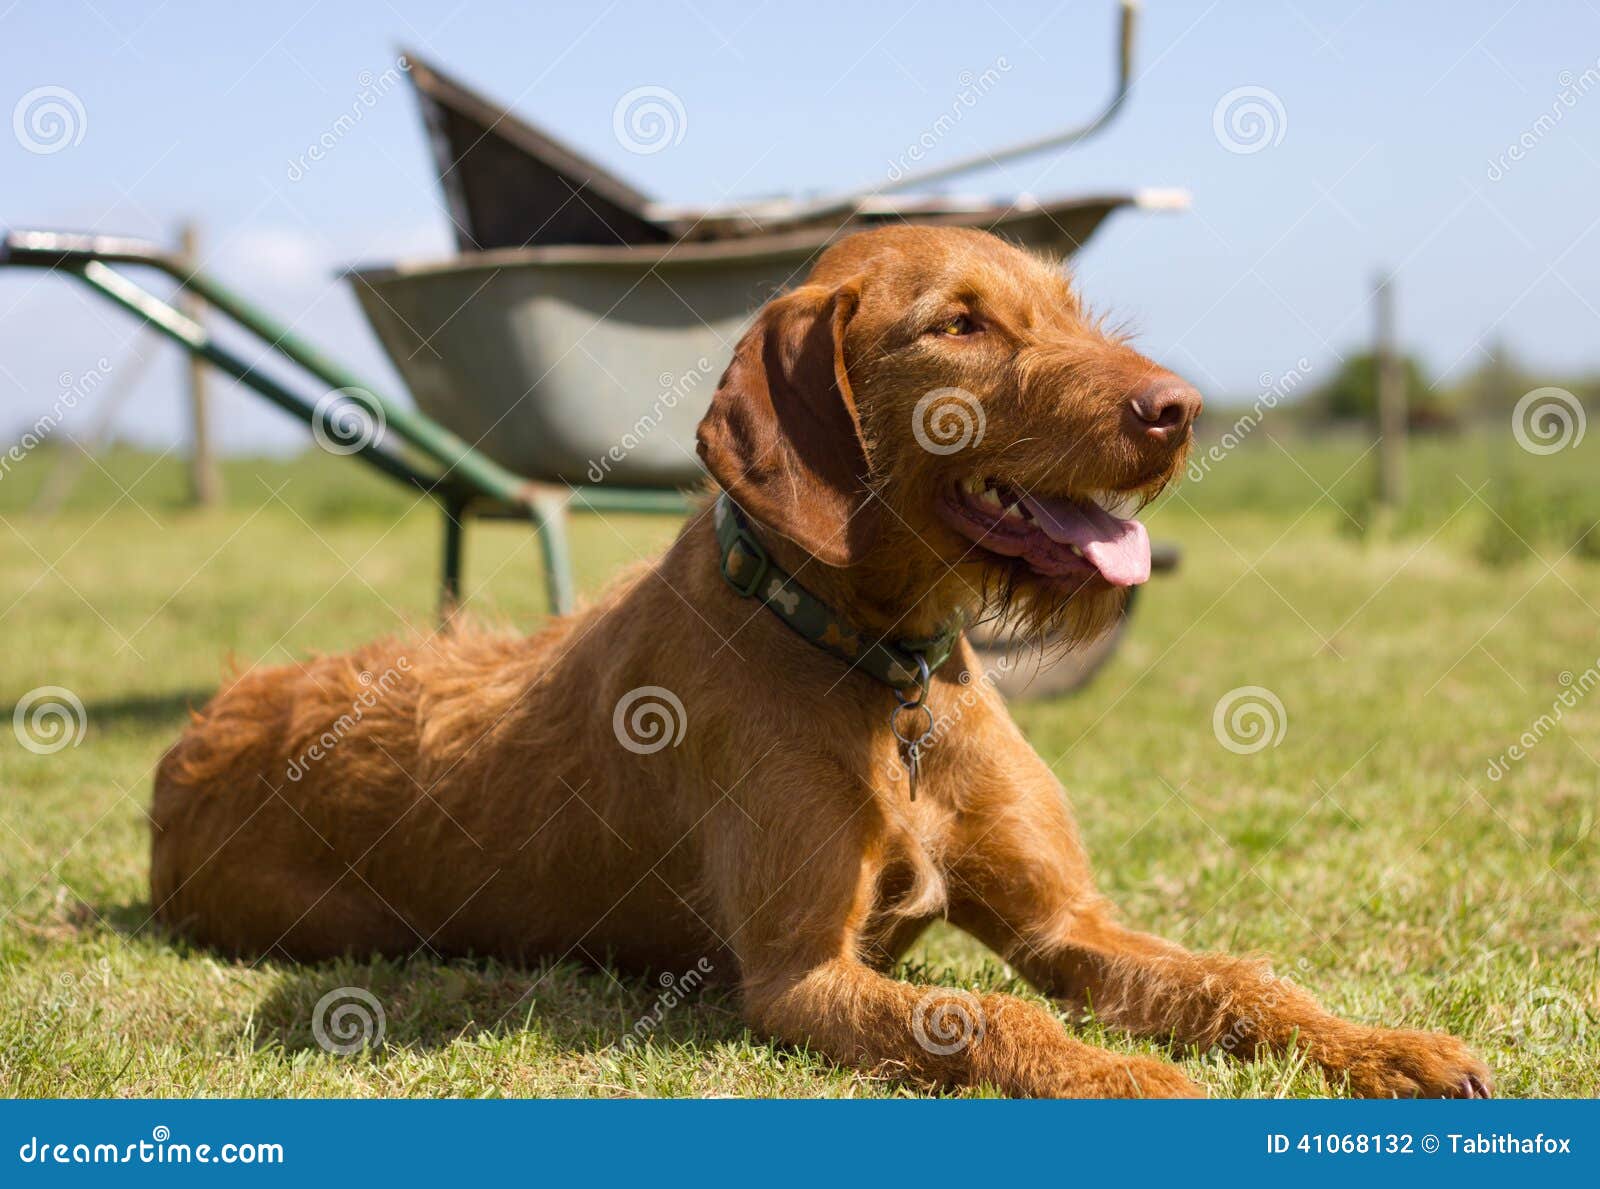 wirehaired hungarian vizsla laying but alert